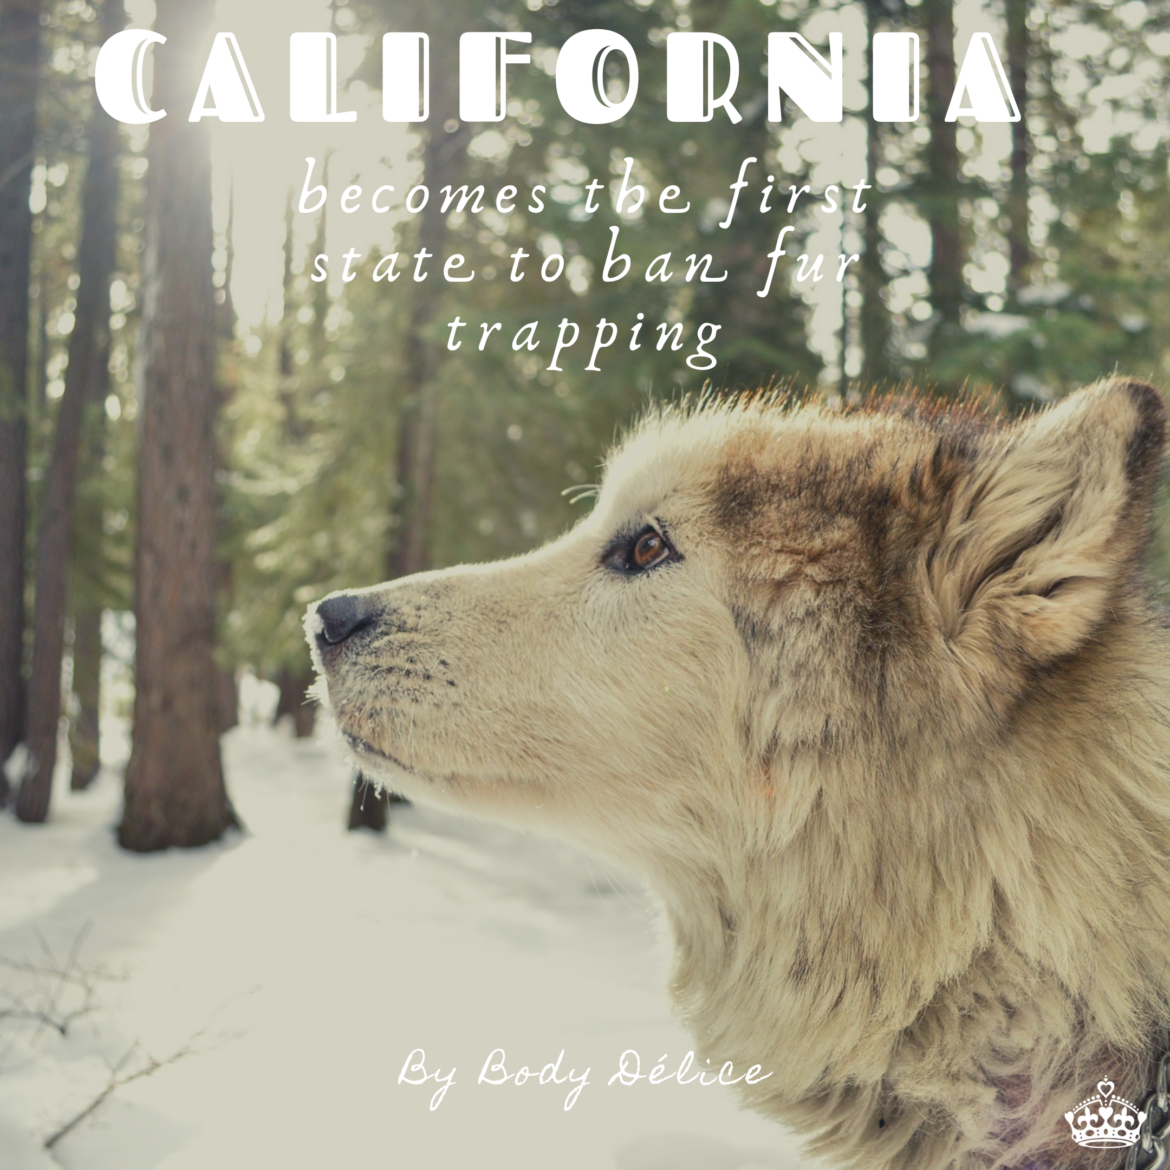 fur trapping banned in California